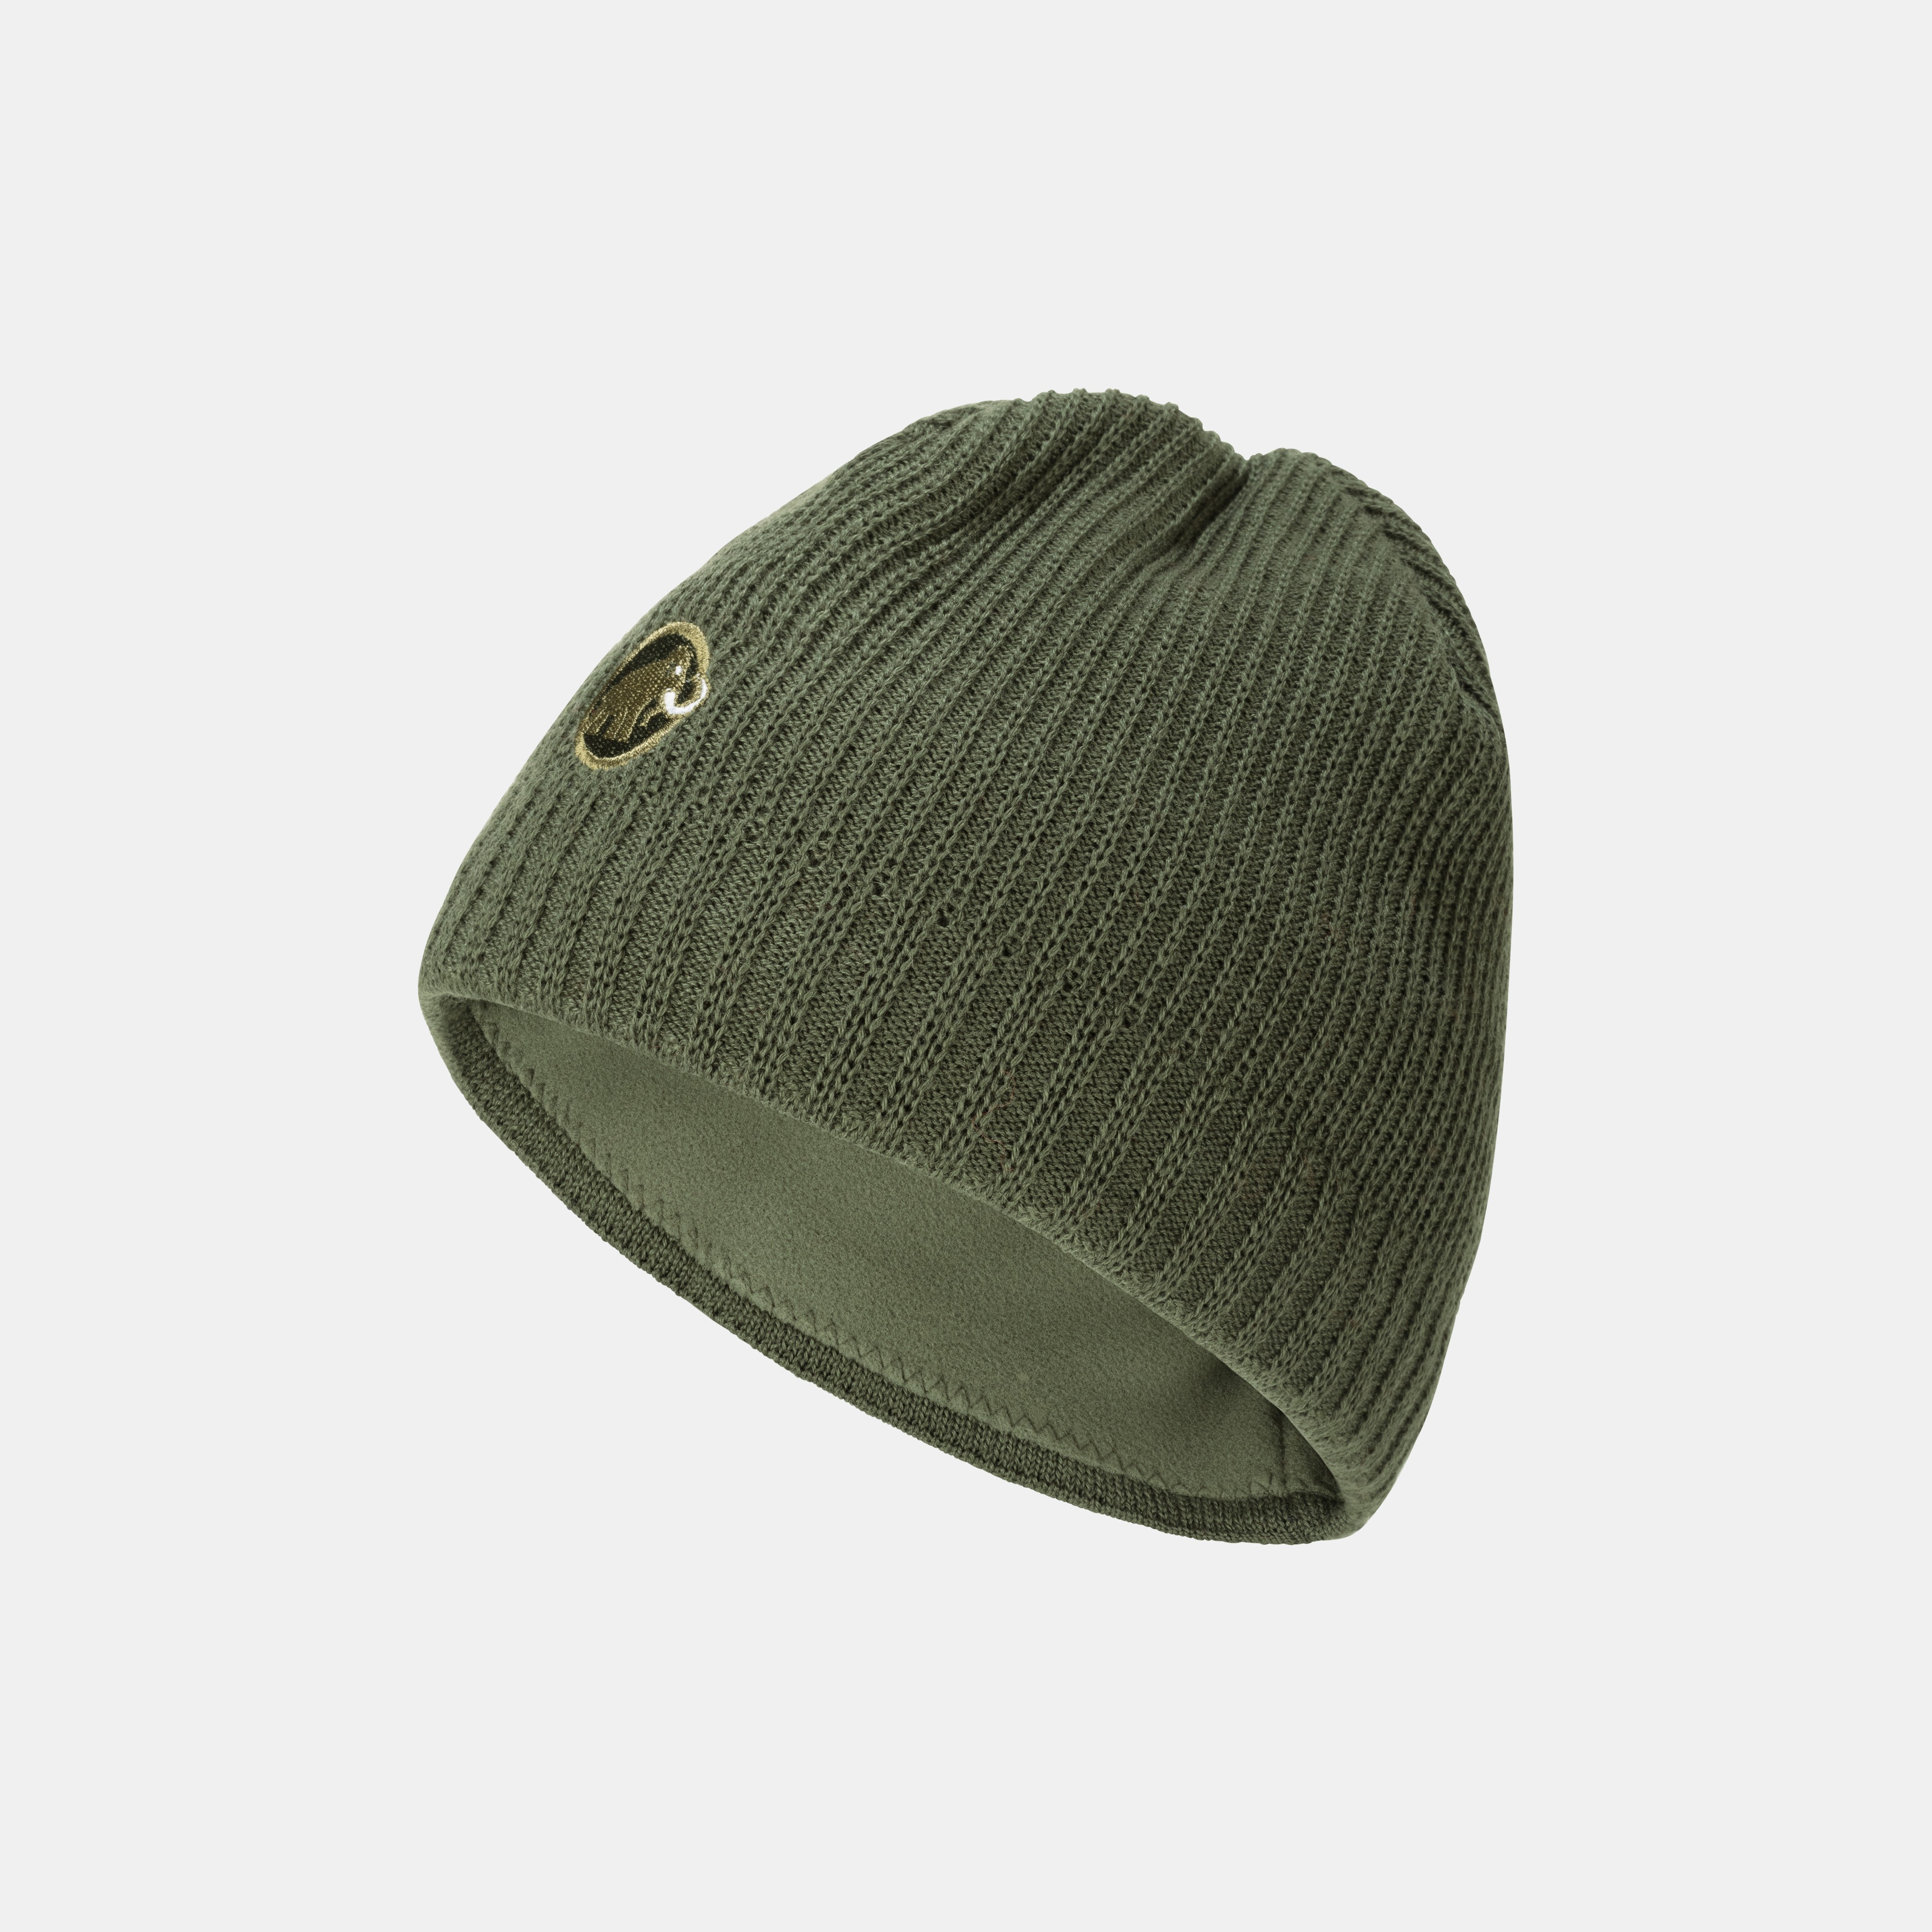 Sublime Beanie product image